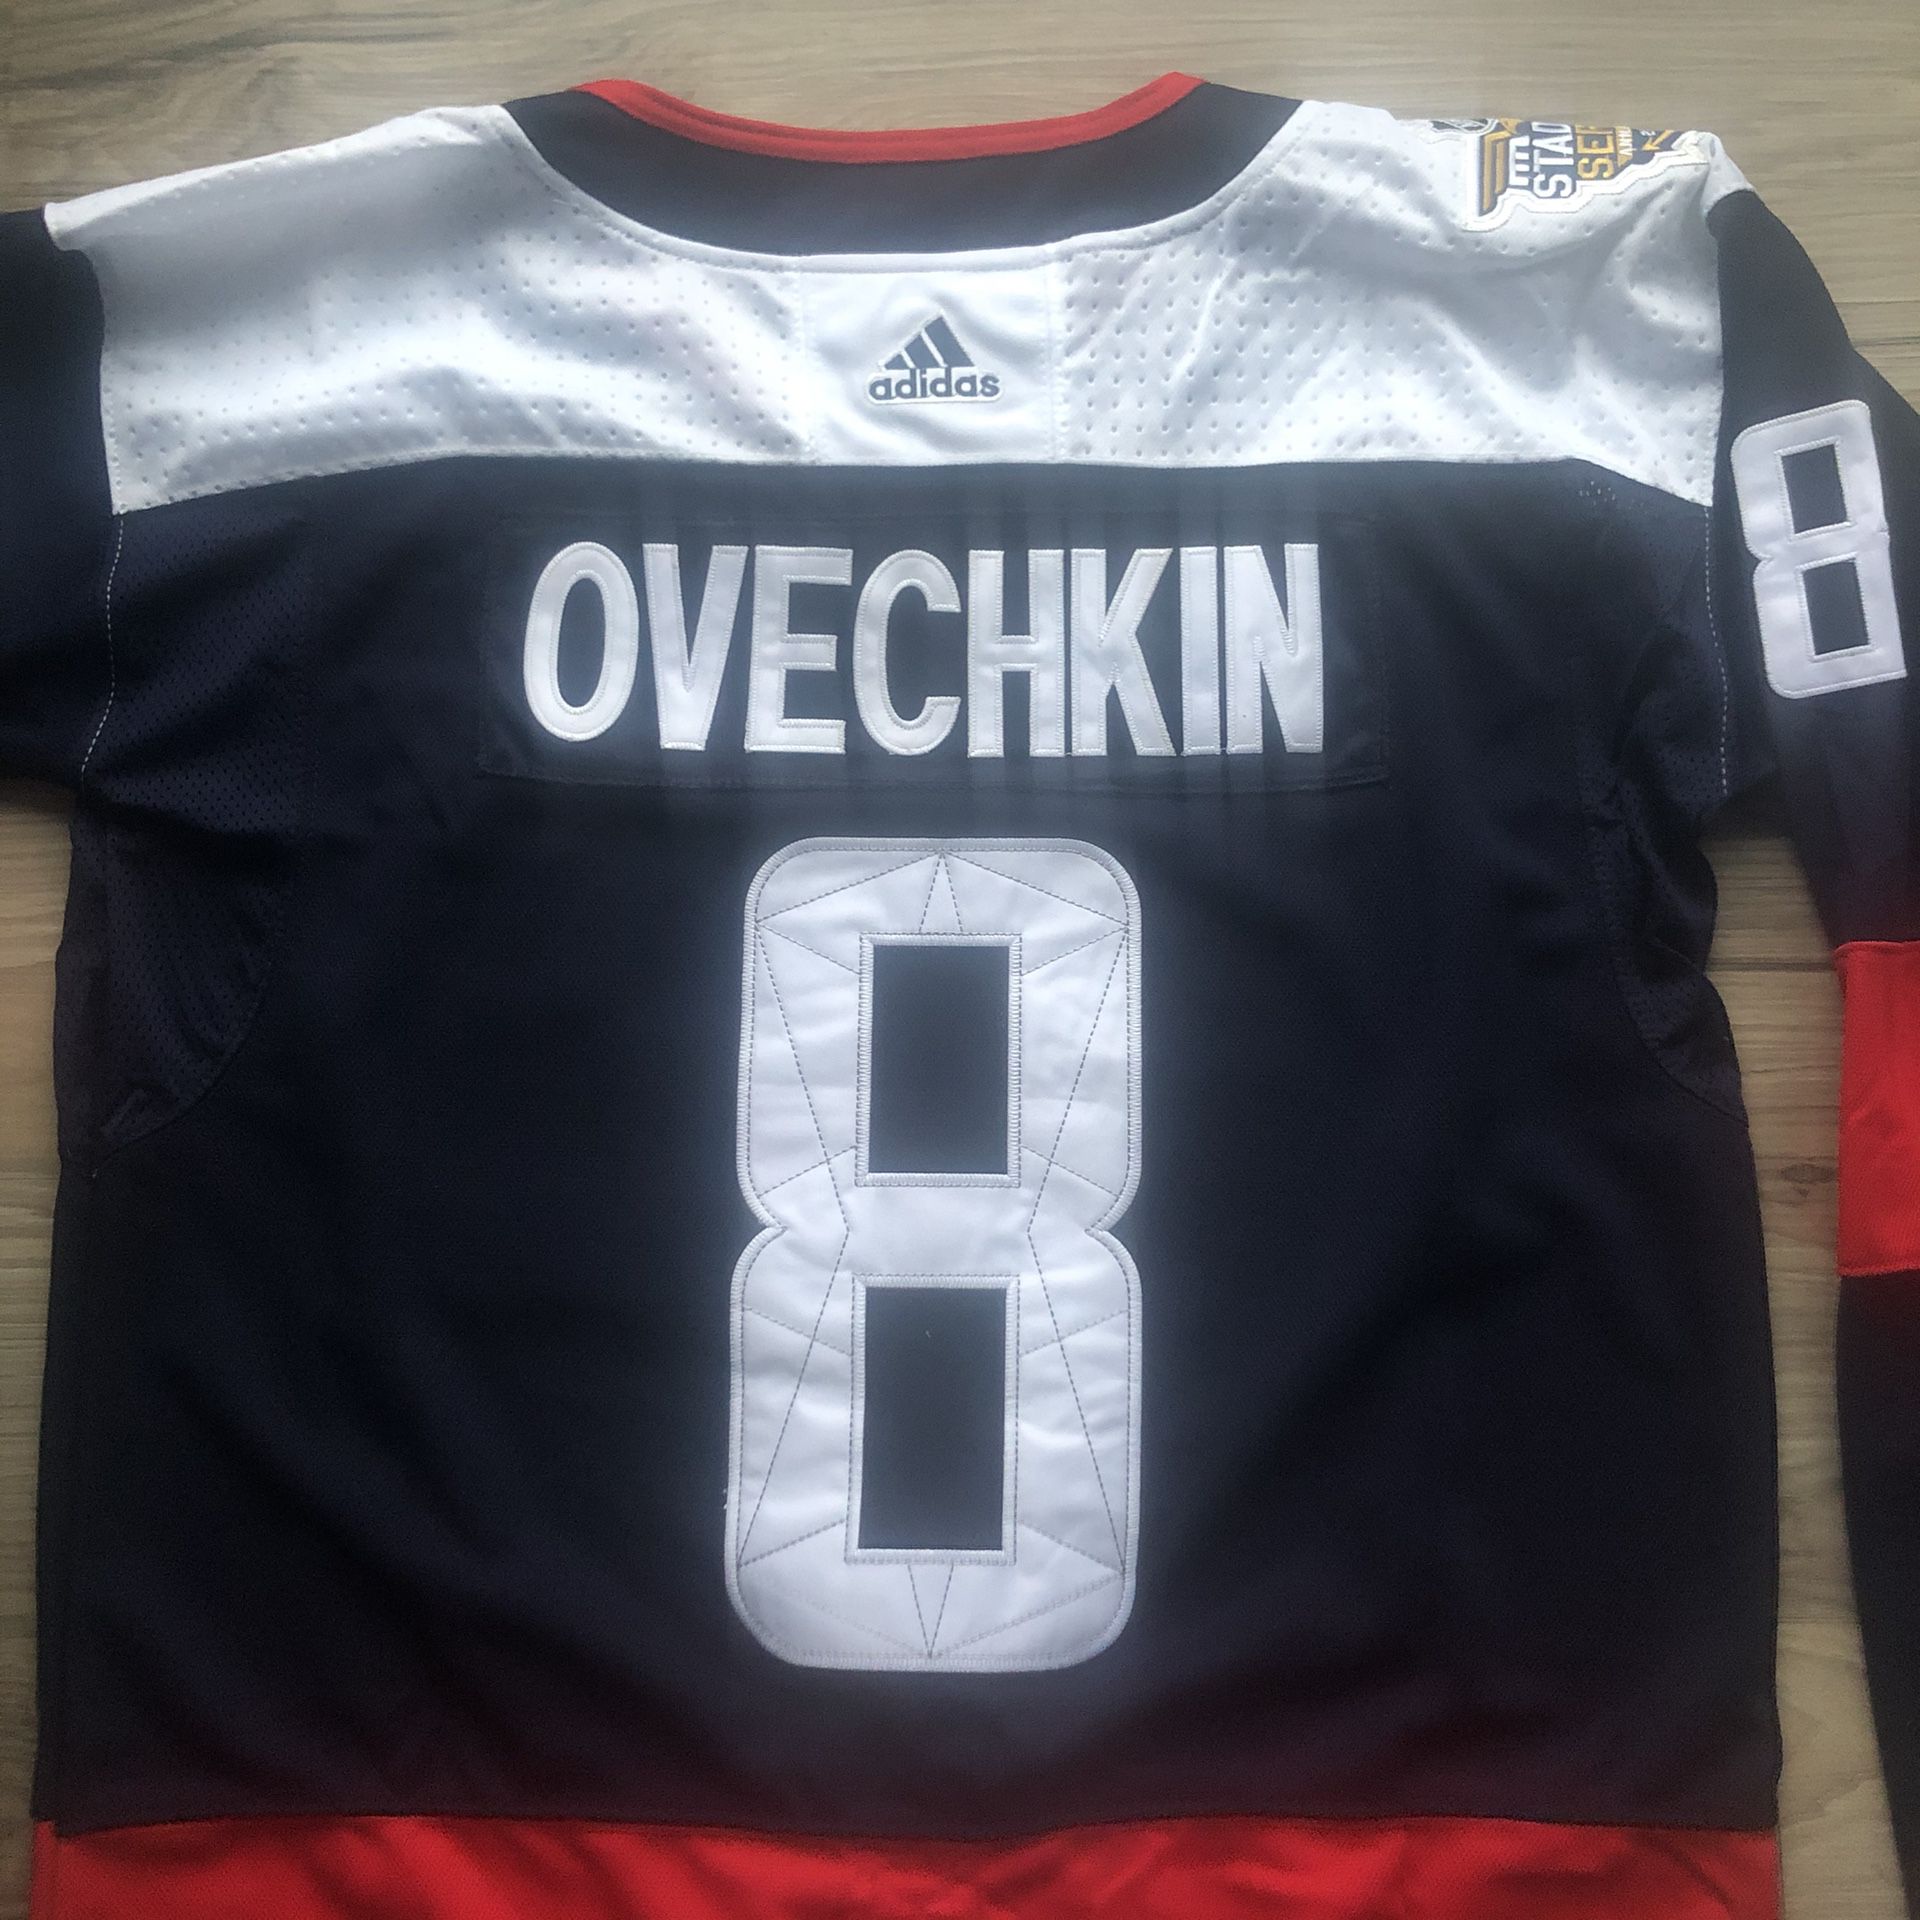 LAST ONE! 🔥 Alexander Ovechkin #8 Washington Capitals Adidas NHL Jersey + Size Large + SHIPS OUT TODAY! 📦 💨